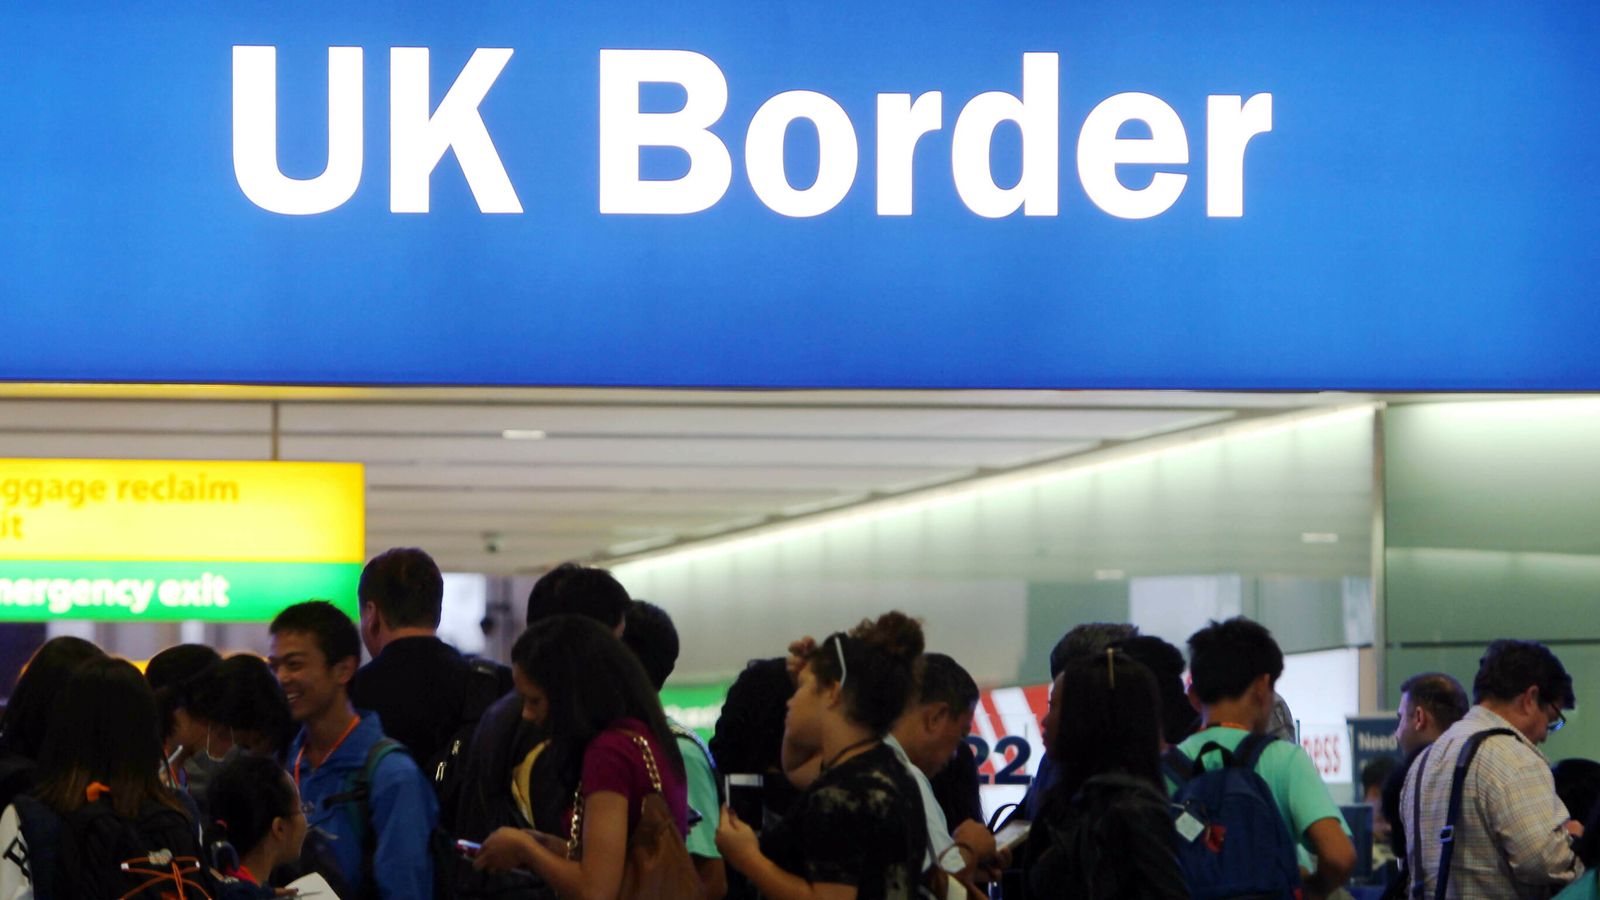 No plans for mandatory COVID-19 testing of arrivals from China, UK government says